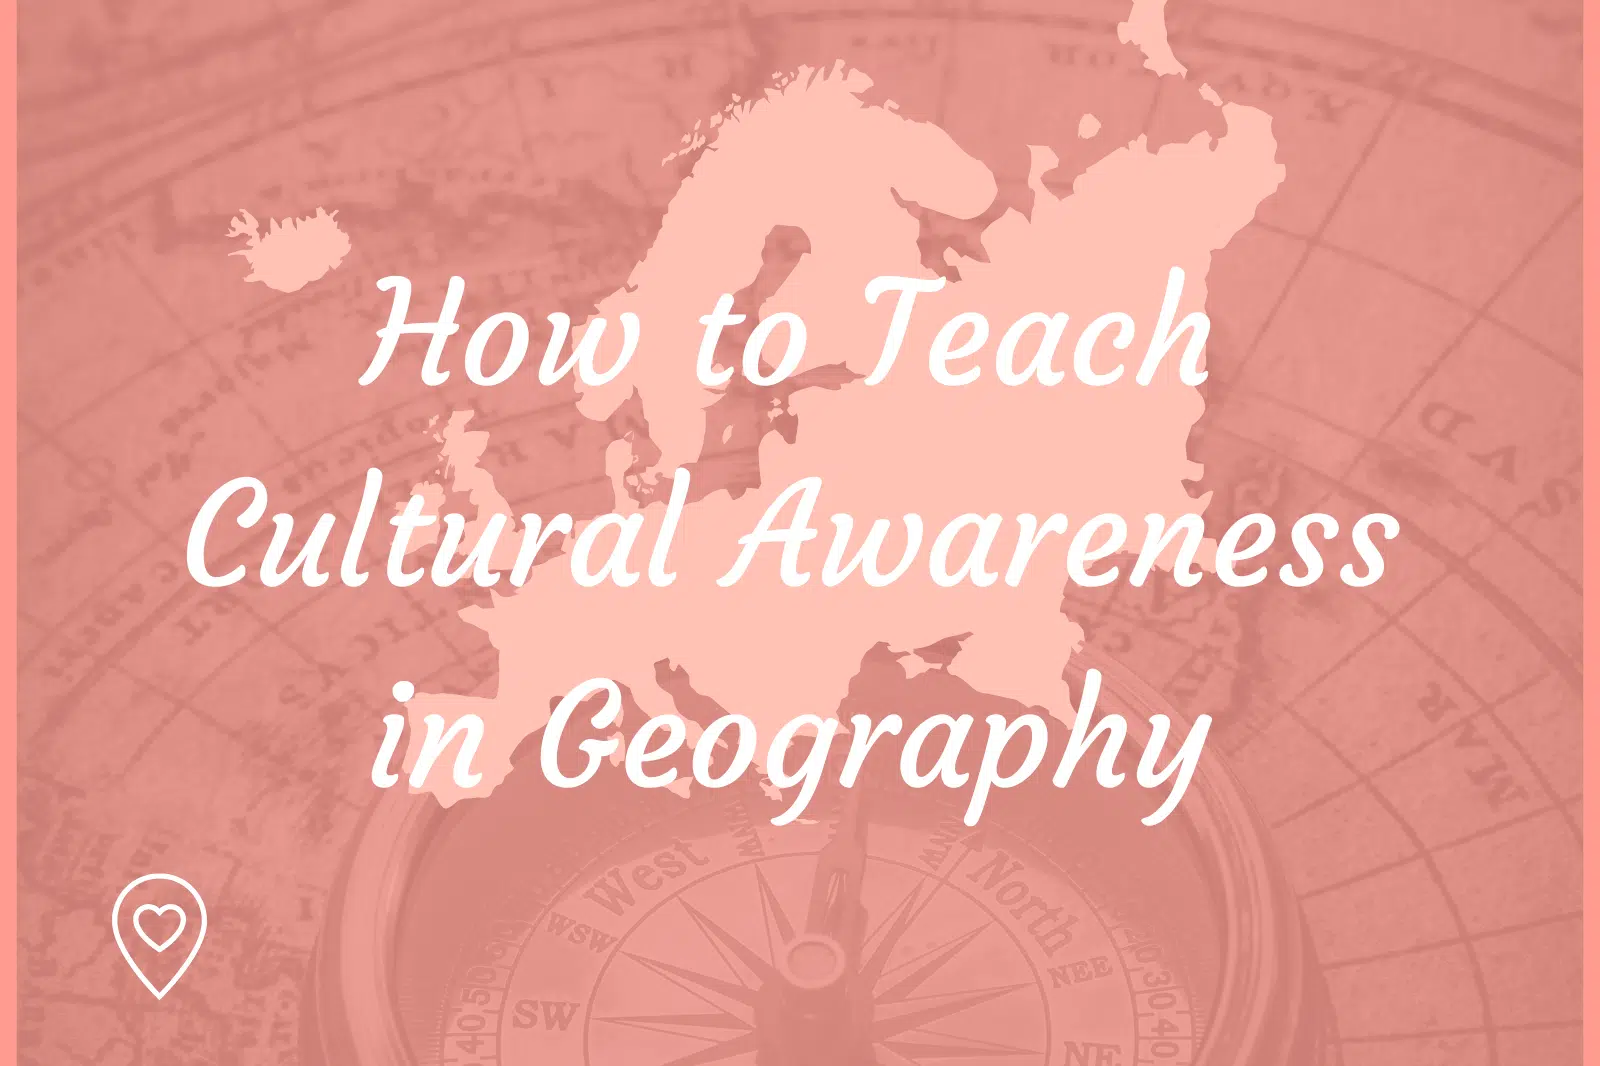 How to Teach Cultural Awareness in Geography